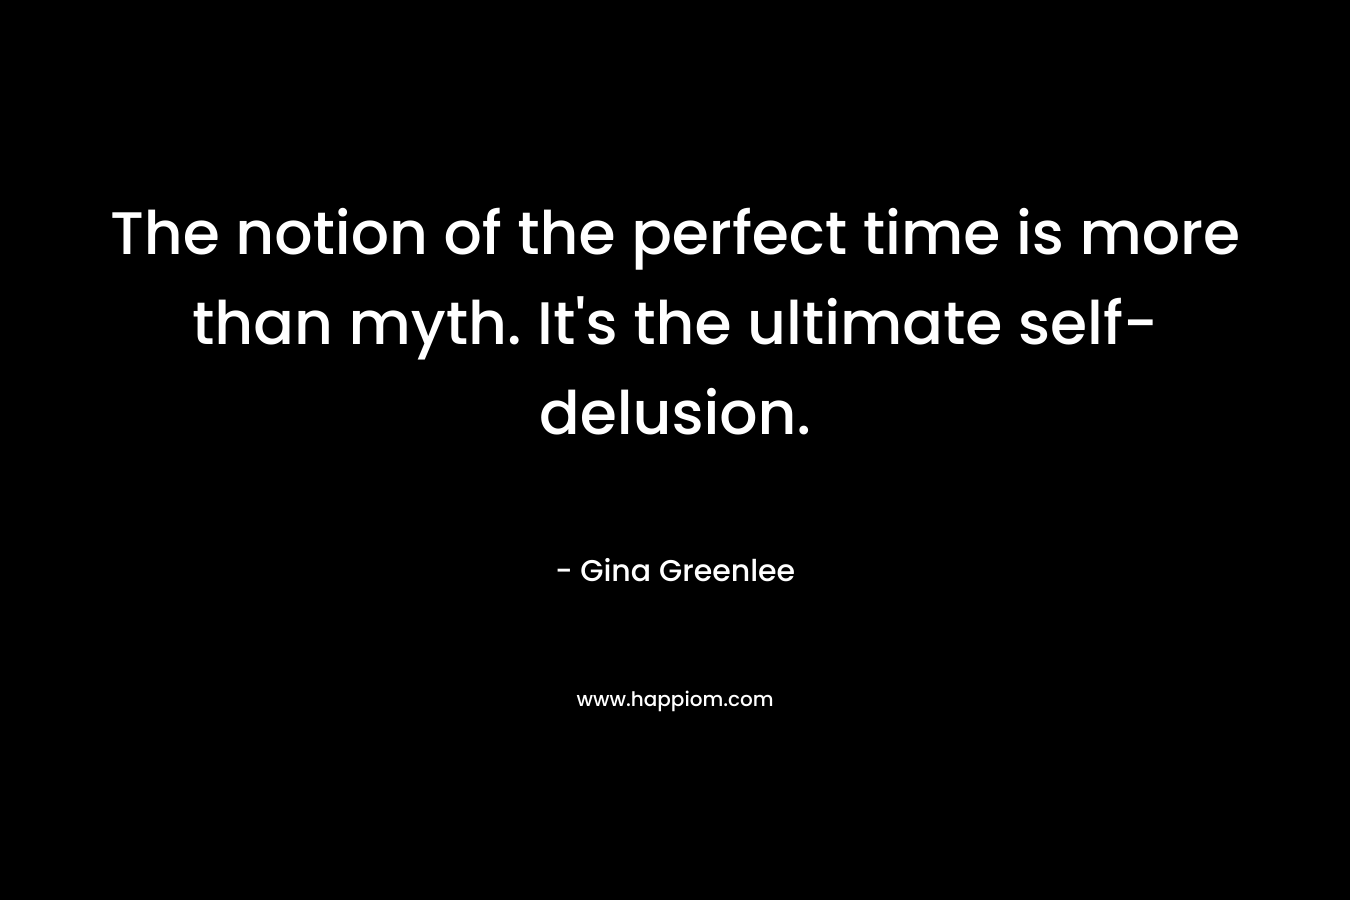 The notion of the perfect time is more than myth. It’s the ultimate self-delusion. – Gina Greenlee